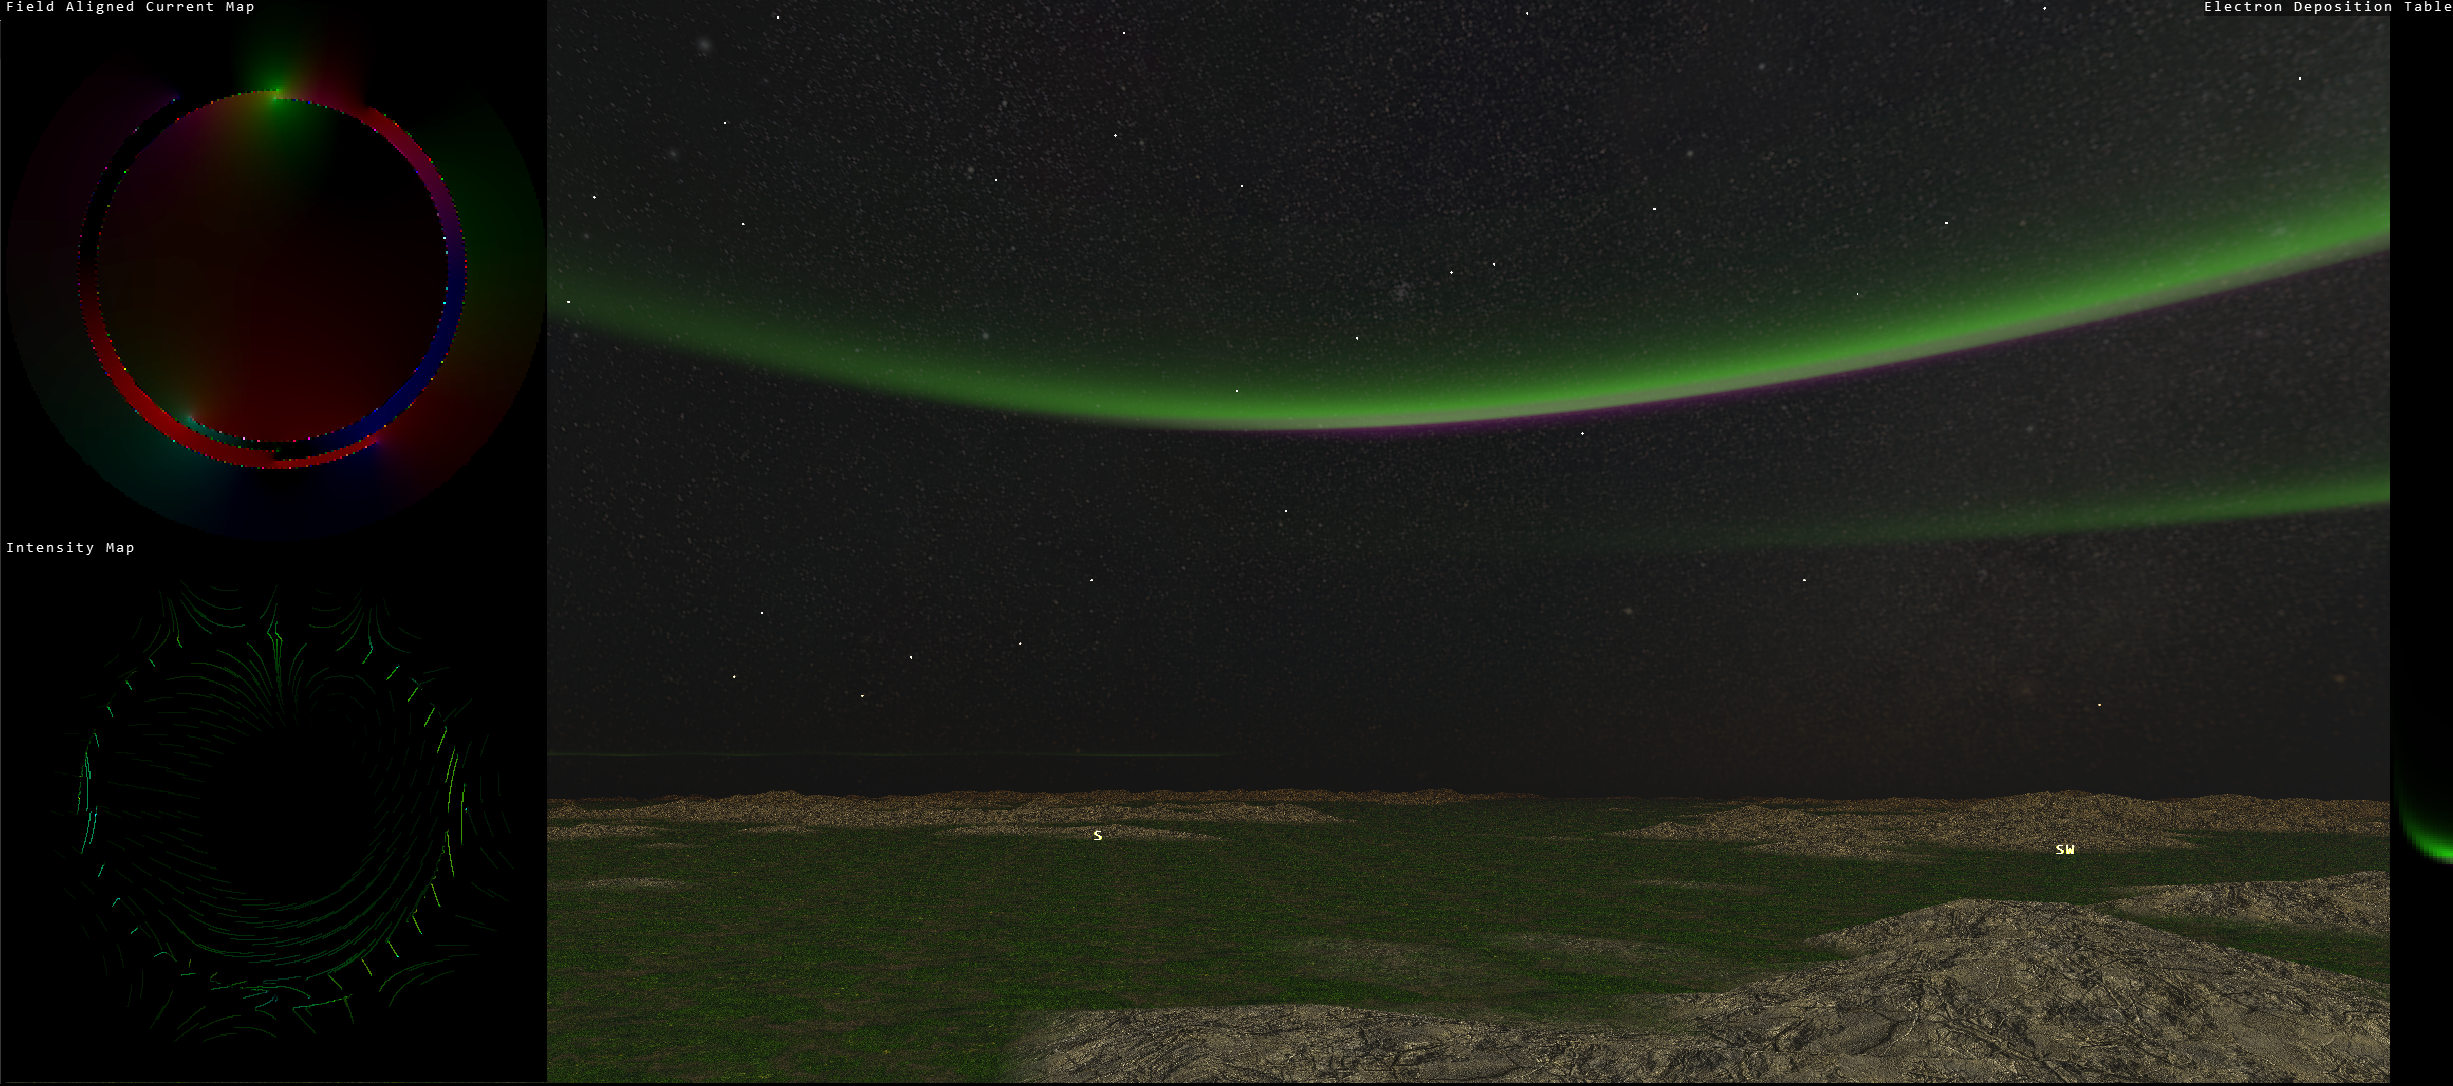 Aurora debug overlay shows intensity field aligned current maps.